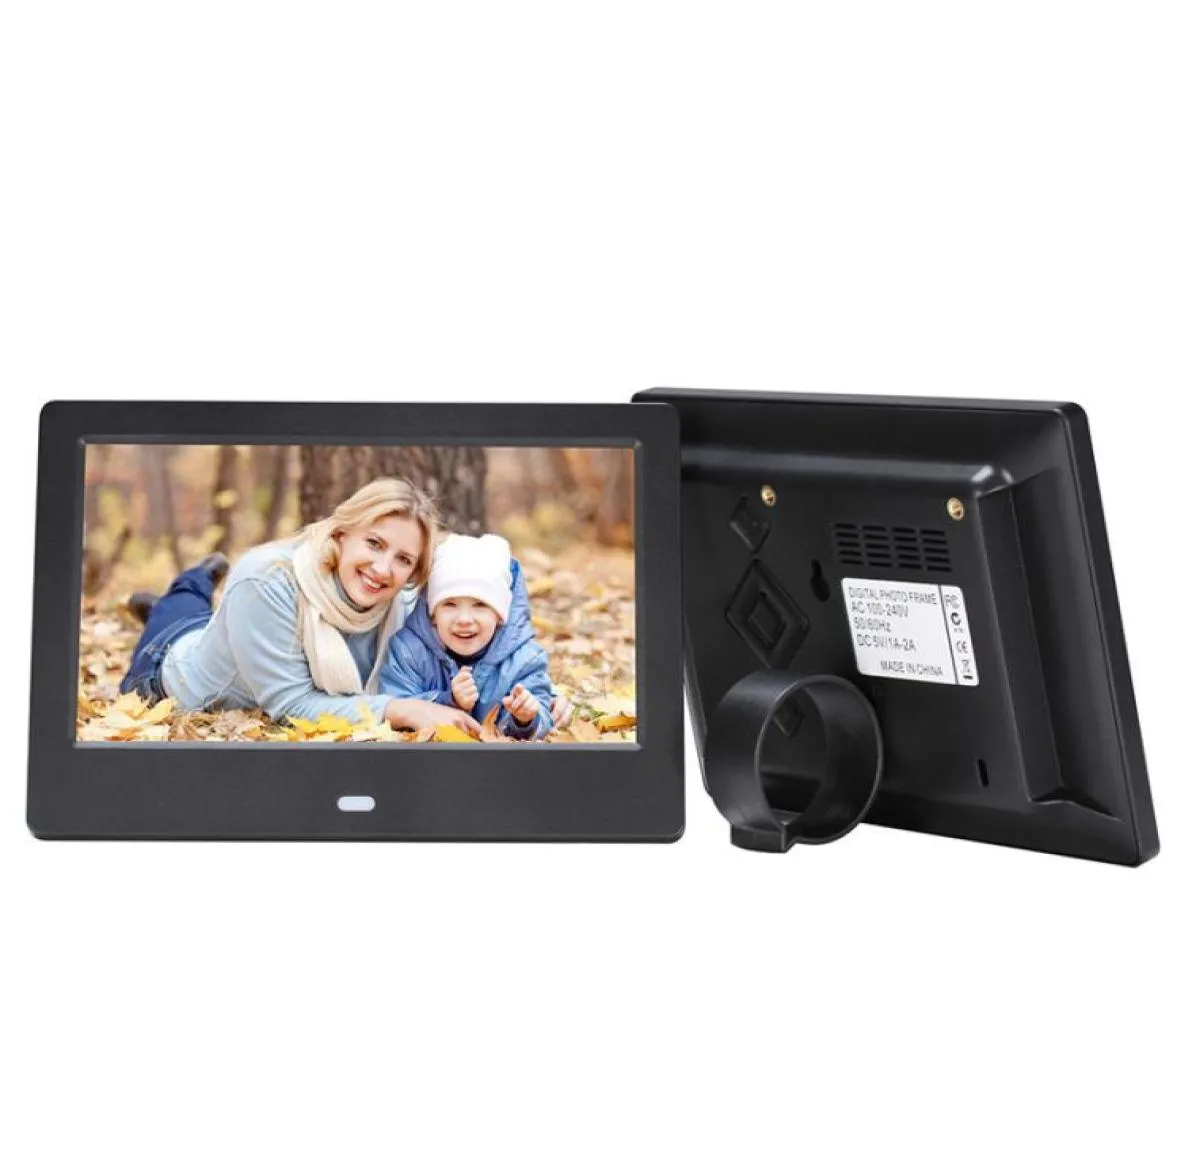 7 Inch Digital Po Frame 1024600 HD LED Backlight Electronic Album Picture Music Video Full Function Gift Remote Control3422821